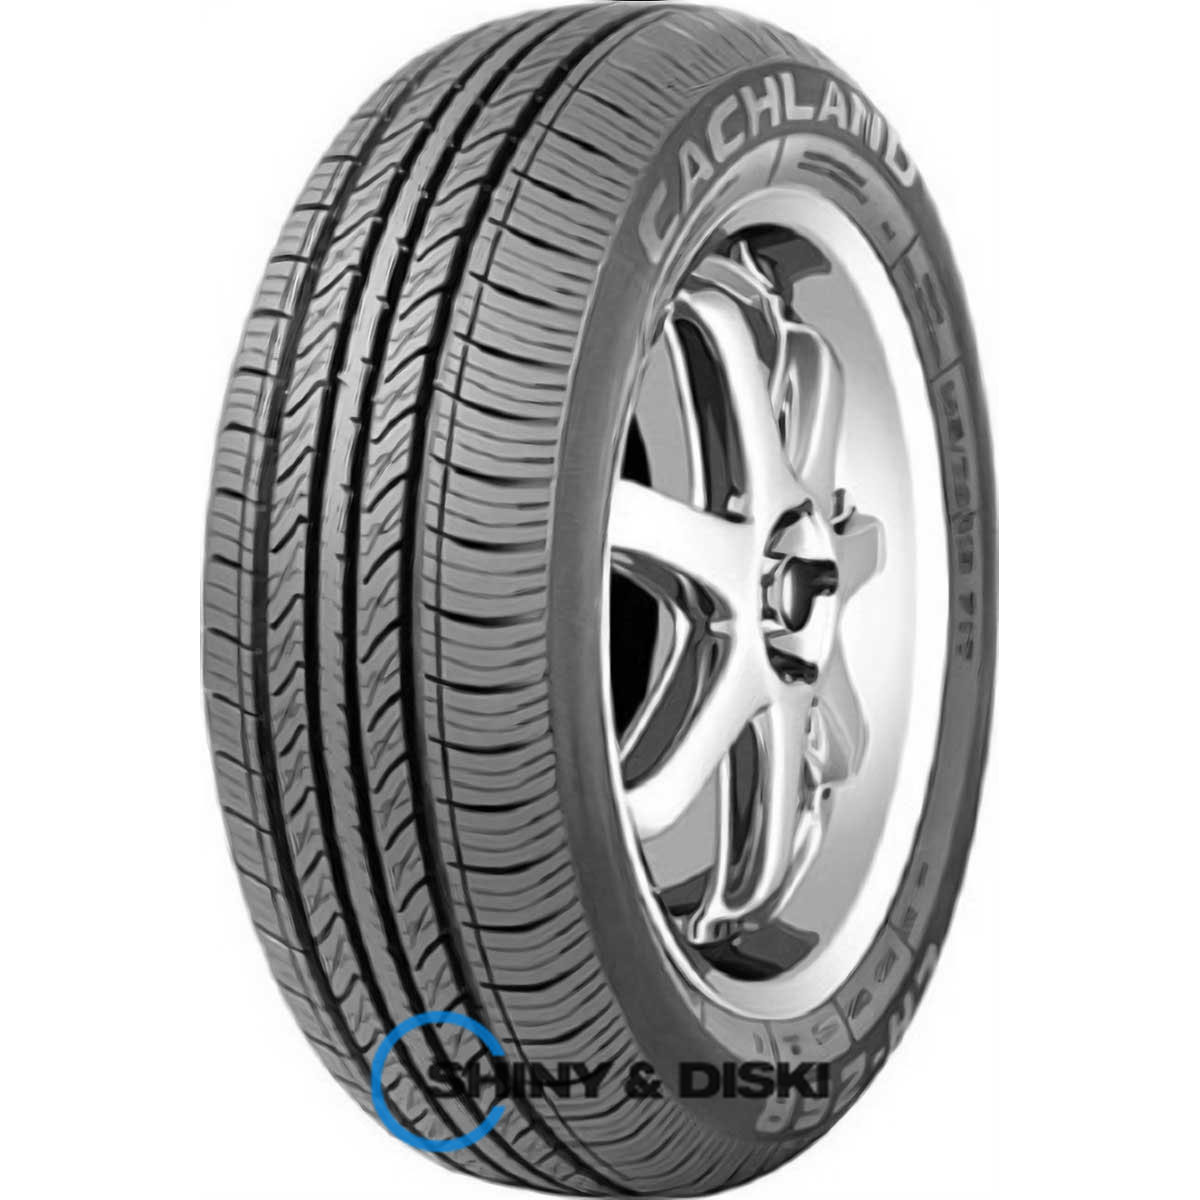 cachland ch-268 165/70 r14 81t